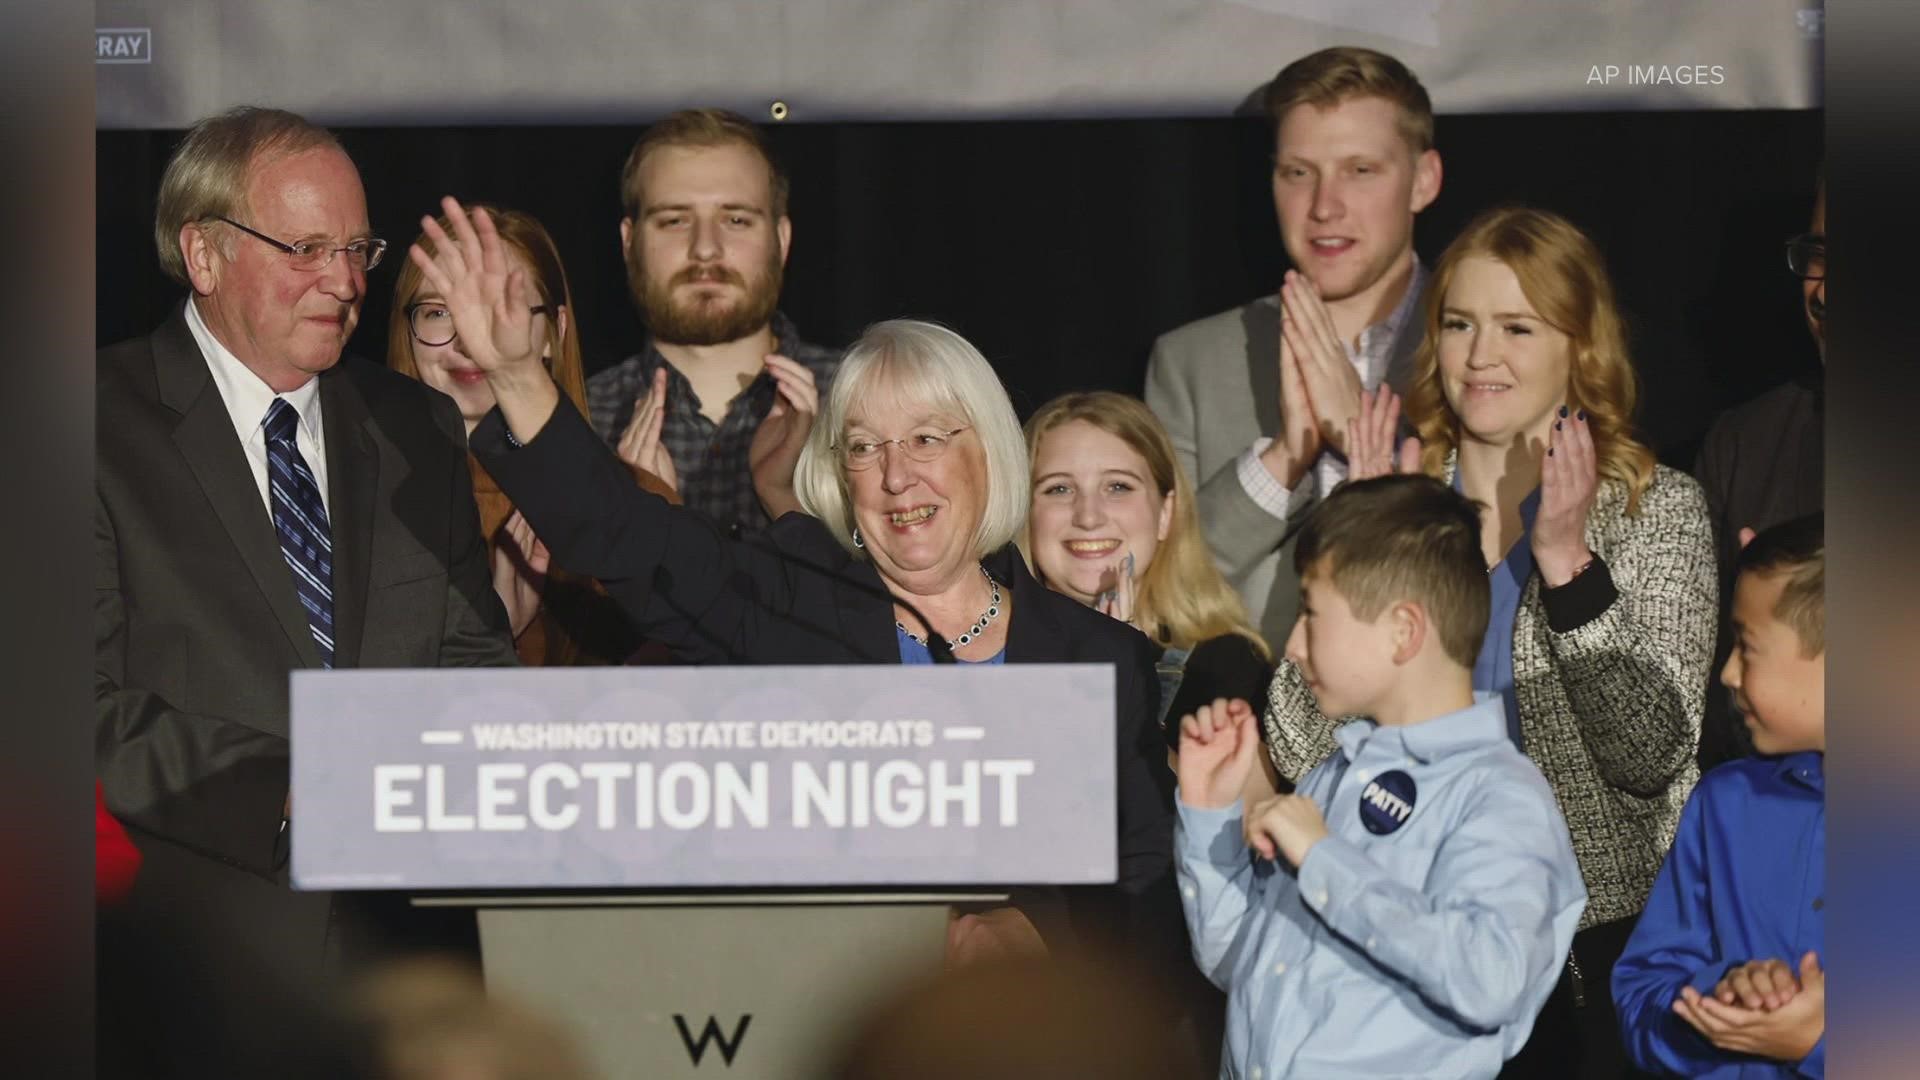 Sen. Patty Murray will likely become the first woman to serve as the Senate pro tempore, which would make her third in line for president of the United States.